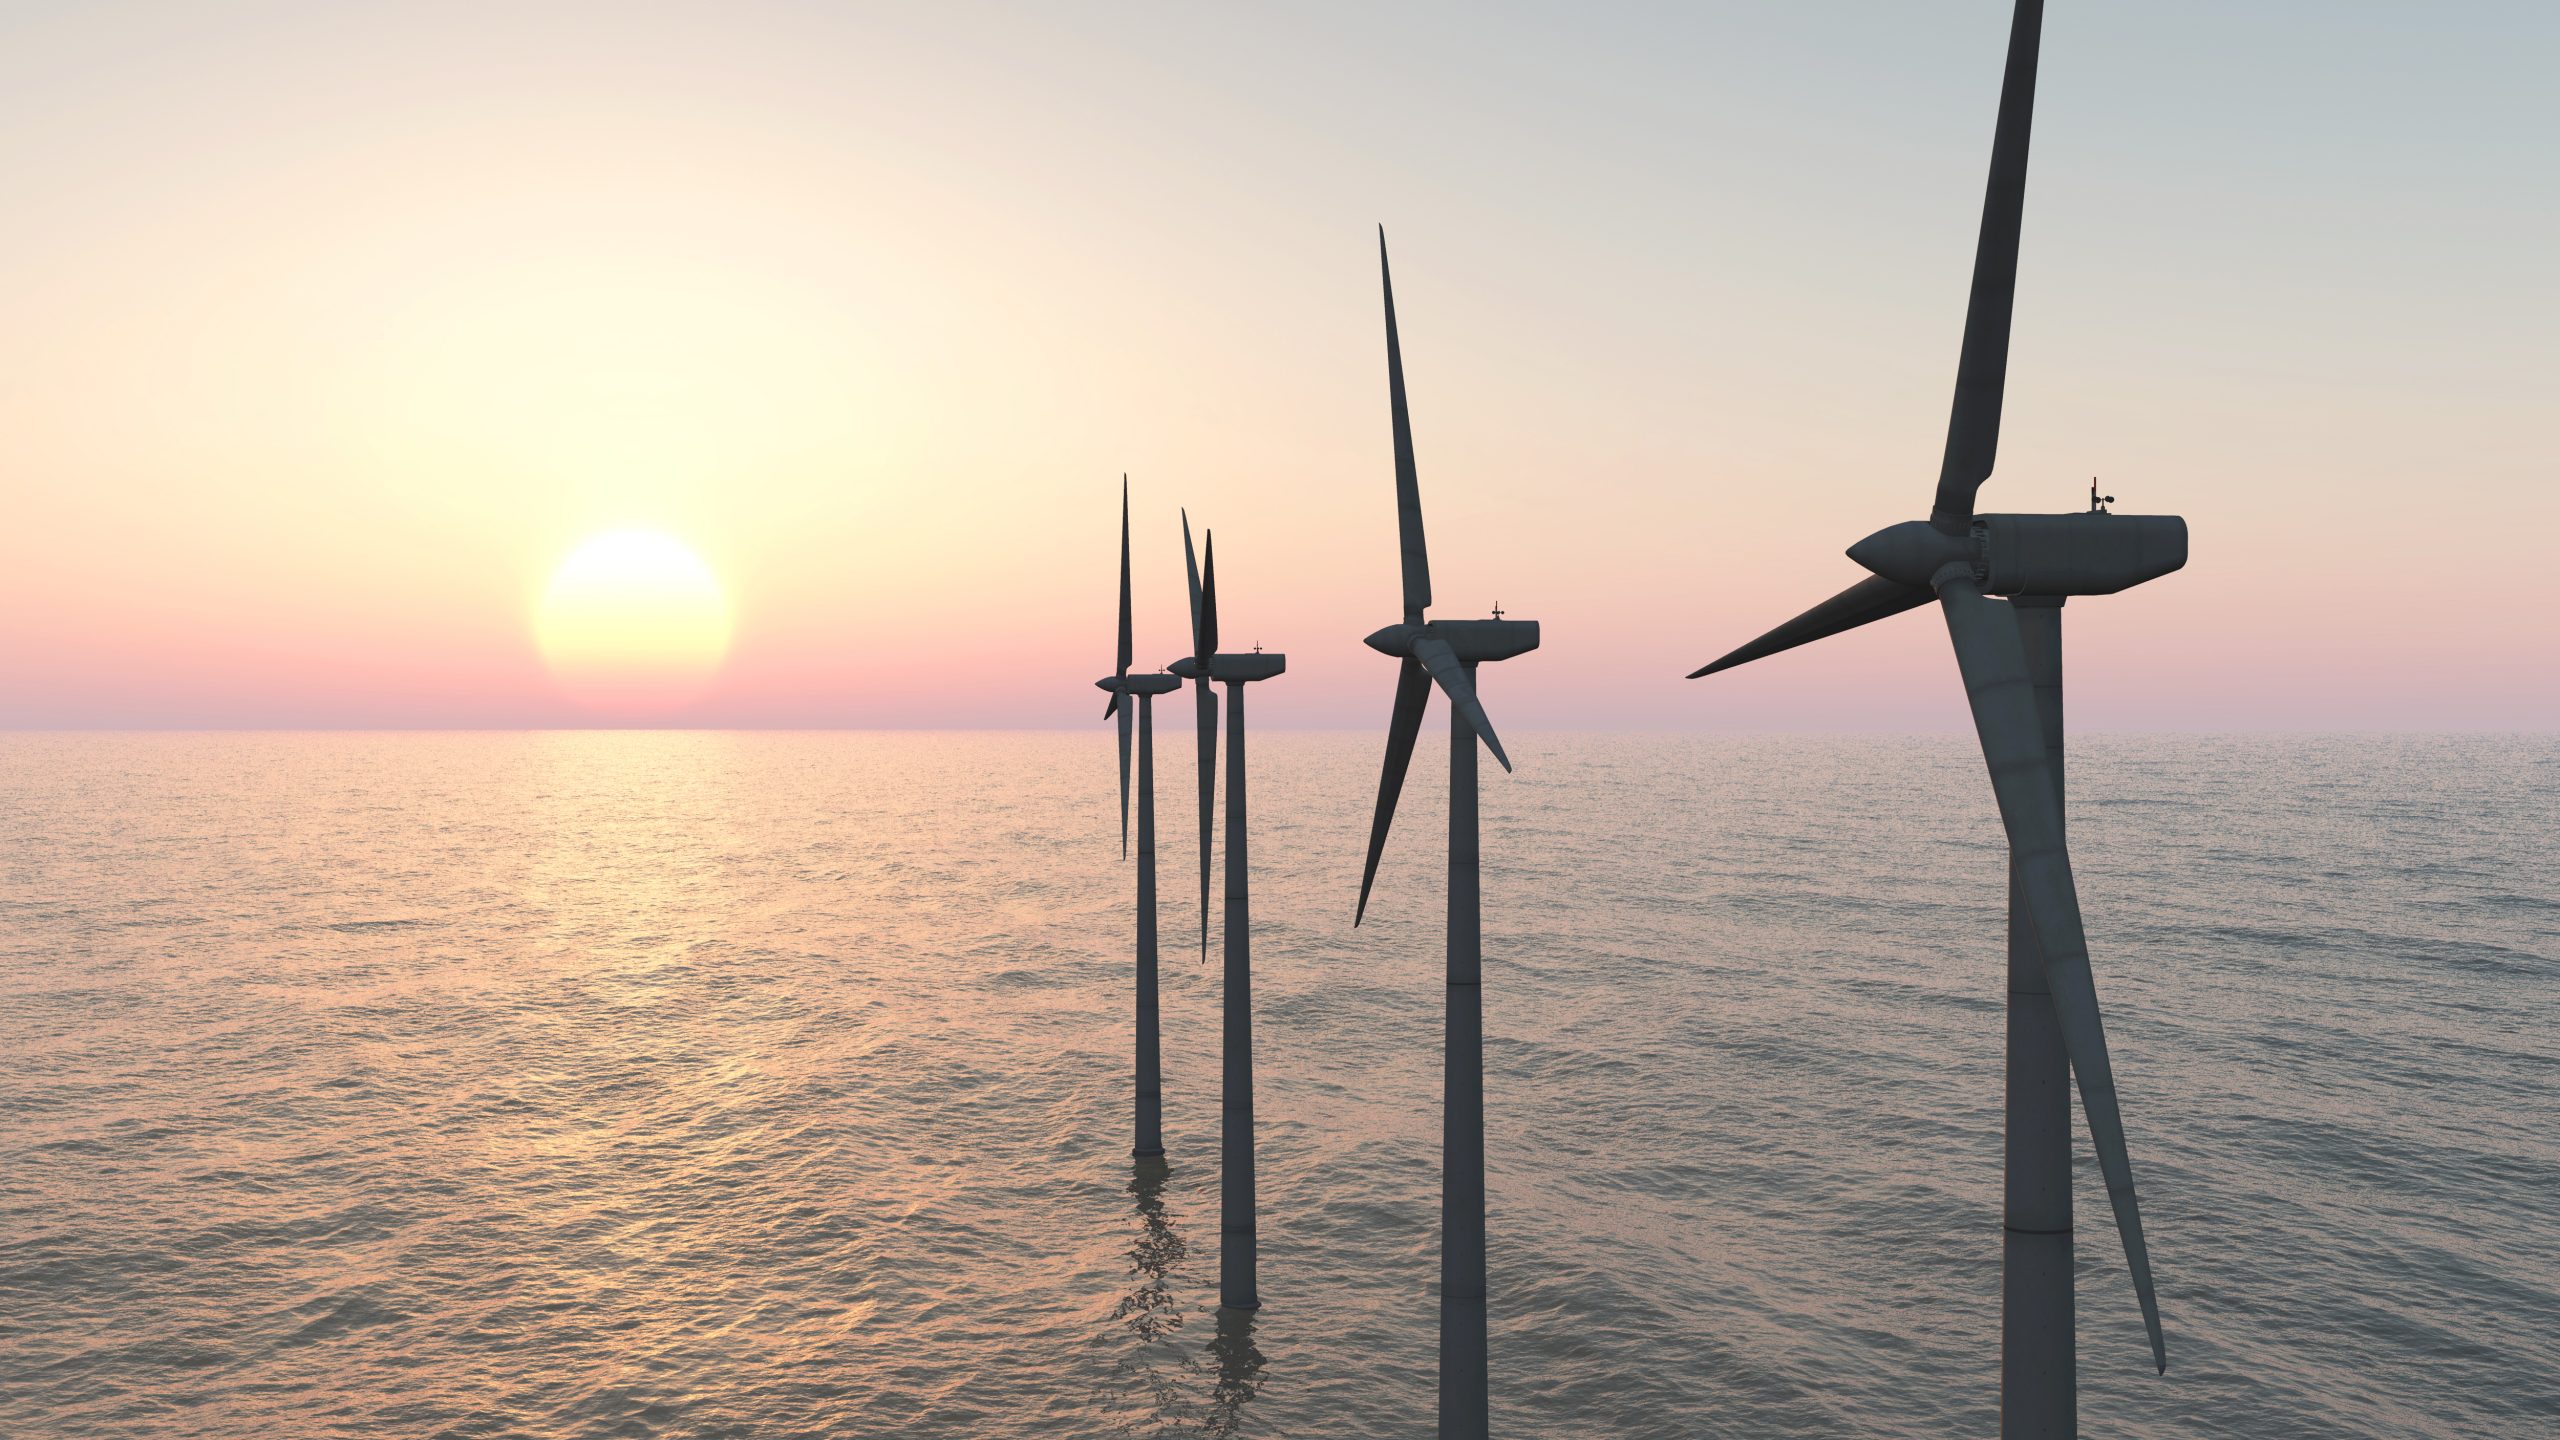 Philippines shows potential for 21GW of offshore wind by 2040